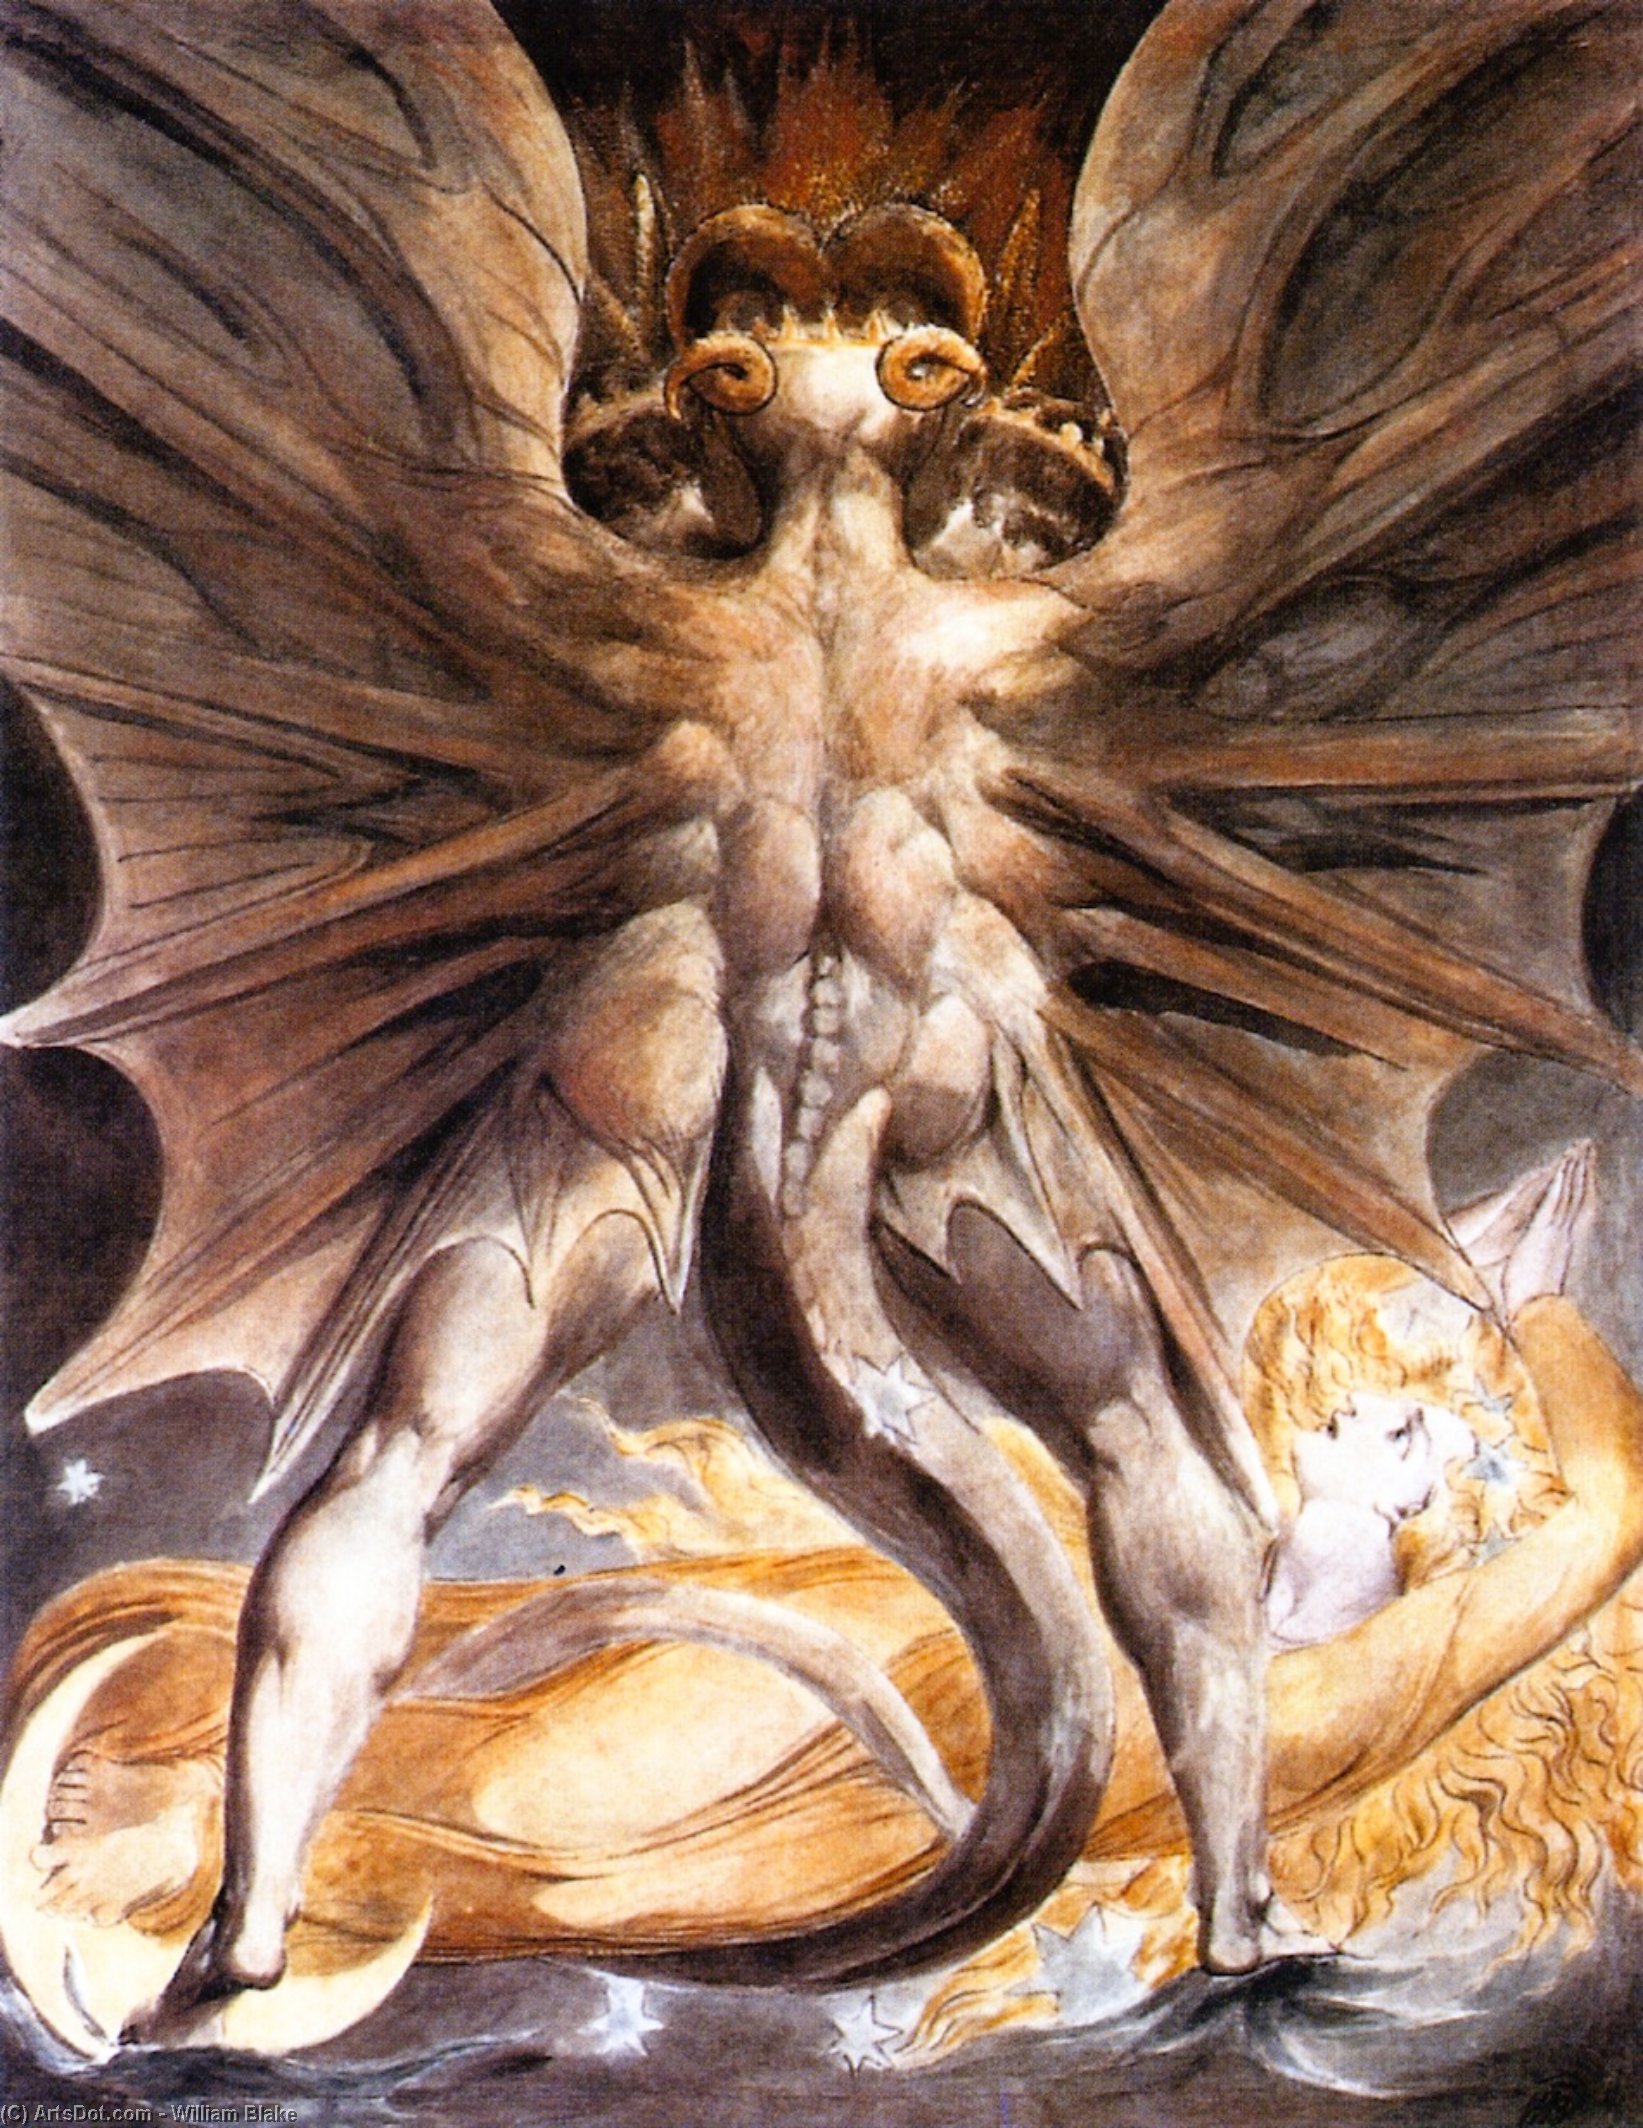 WikiOO.org - دایره المعارف هنرهای زیبا - نقاشی، آثار هنری William Blake - The Great Red Dragon and the Woman Clothed in Sun